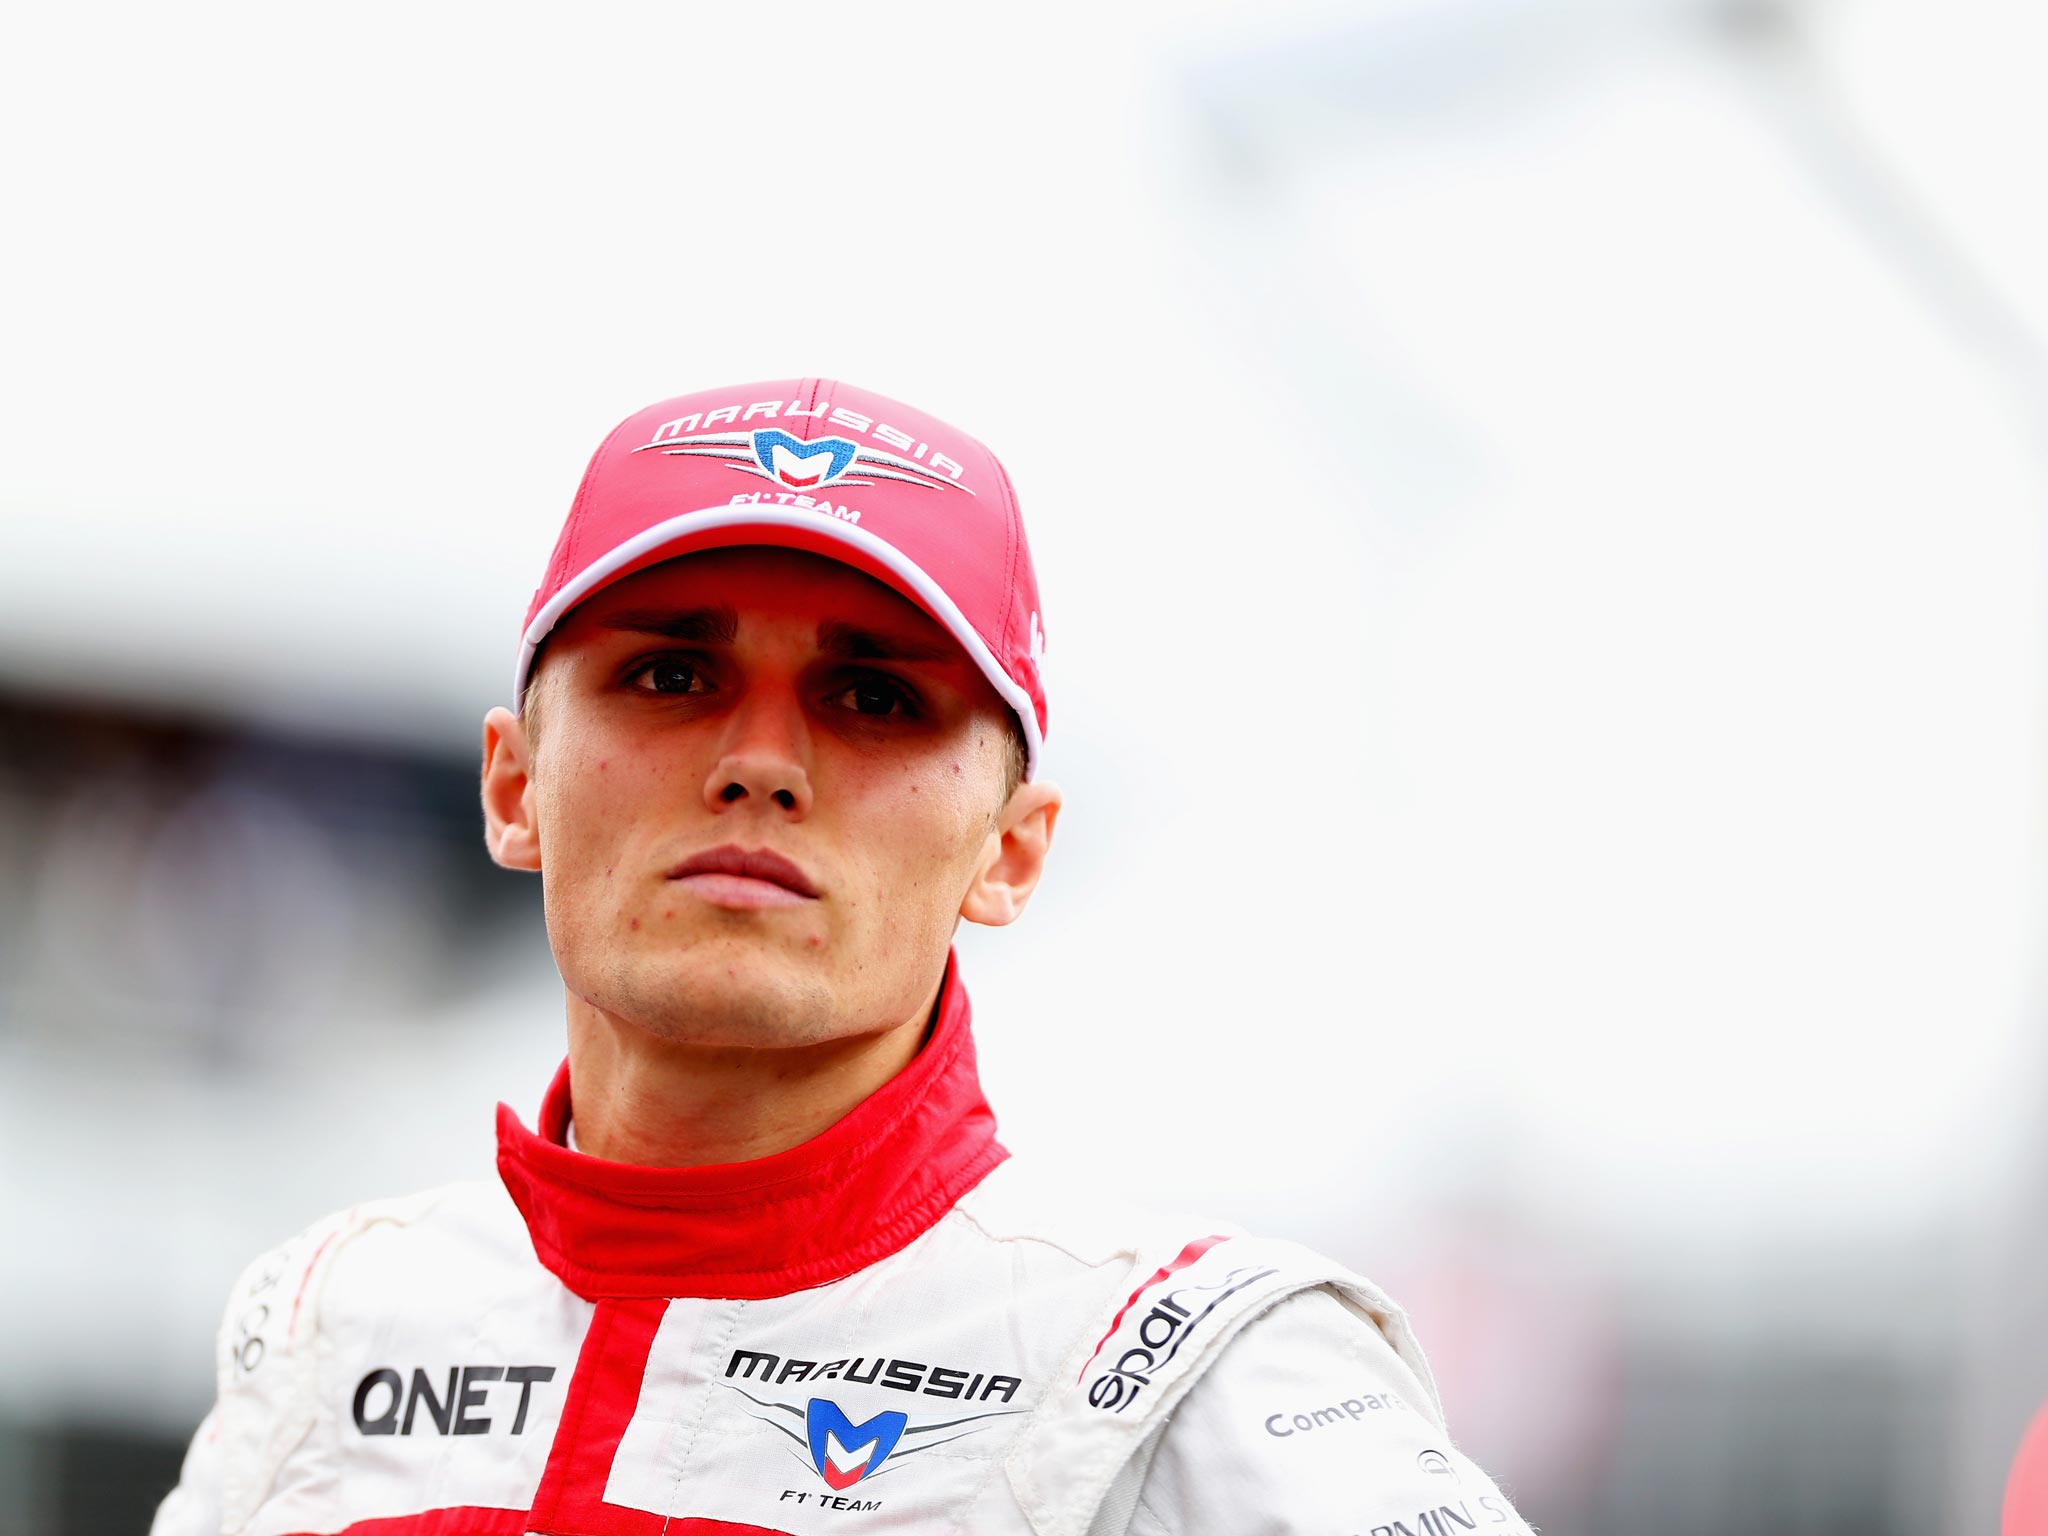 Max Chilton has been training in a heat chamber to prepare for the extreme conditions he will face in the Malaysian Grand Prix